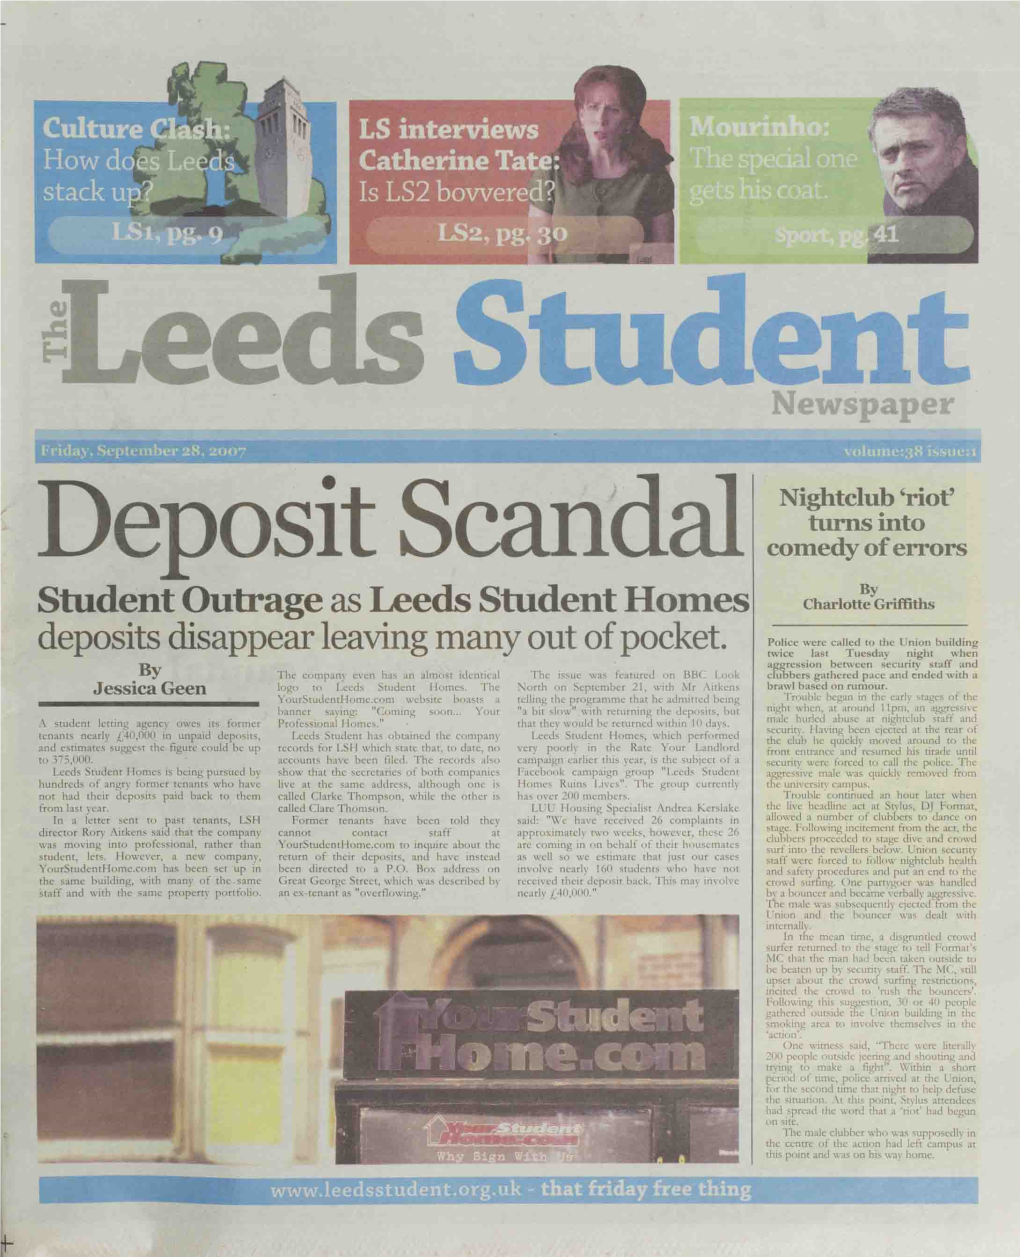 Student Outrage As Leeds Student Homes Deposits Disappear Leaving